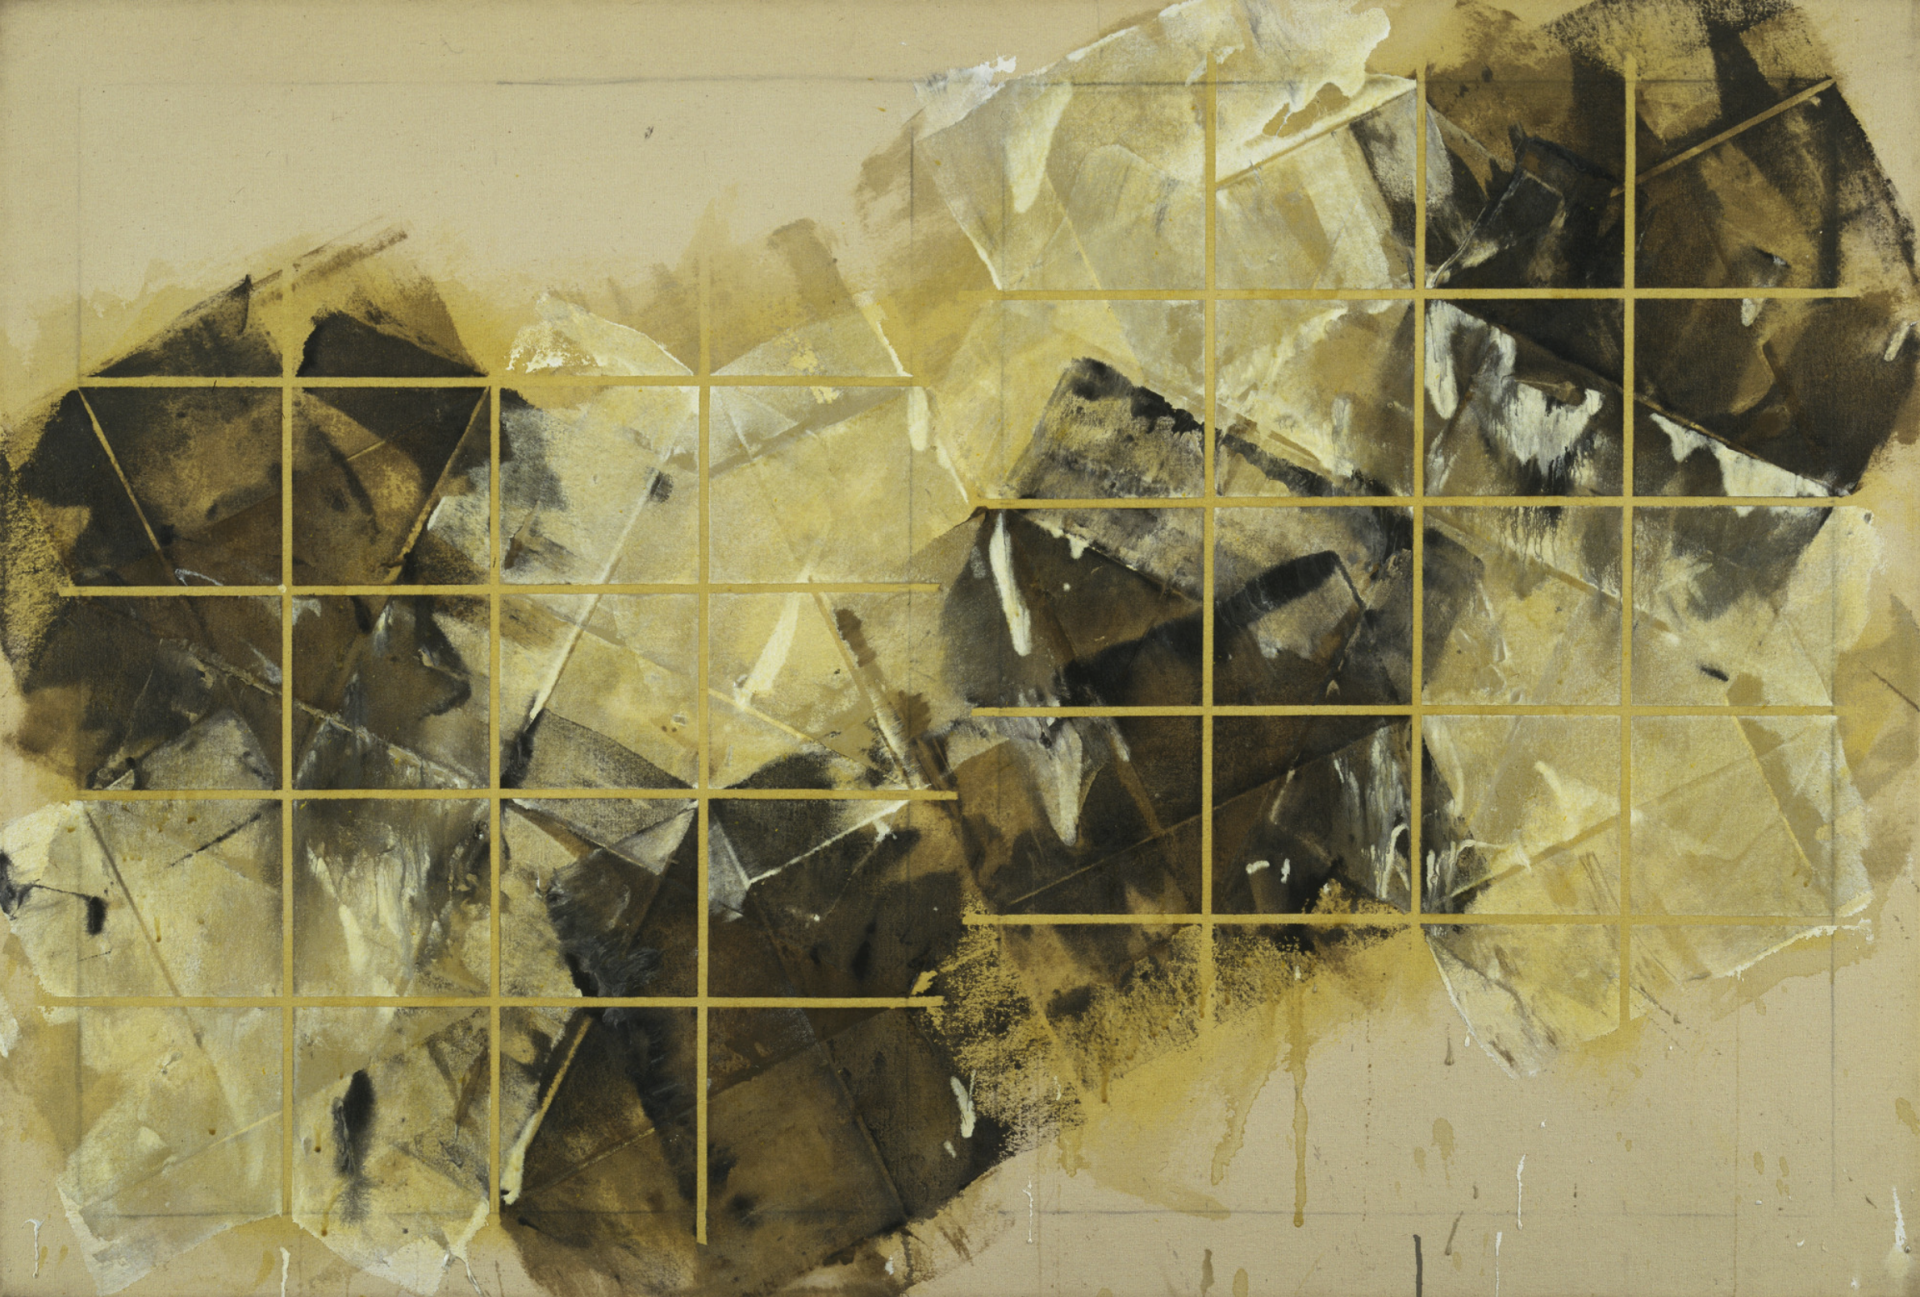 "14th Street Series Number 9" by Mark Lancaster, 1972, an abstract painting with a grid of shapes in a 'V' arrangement, using a warm palette of browns and yellows with black and white accents.